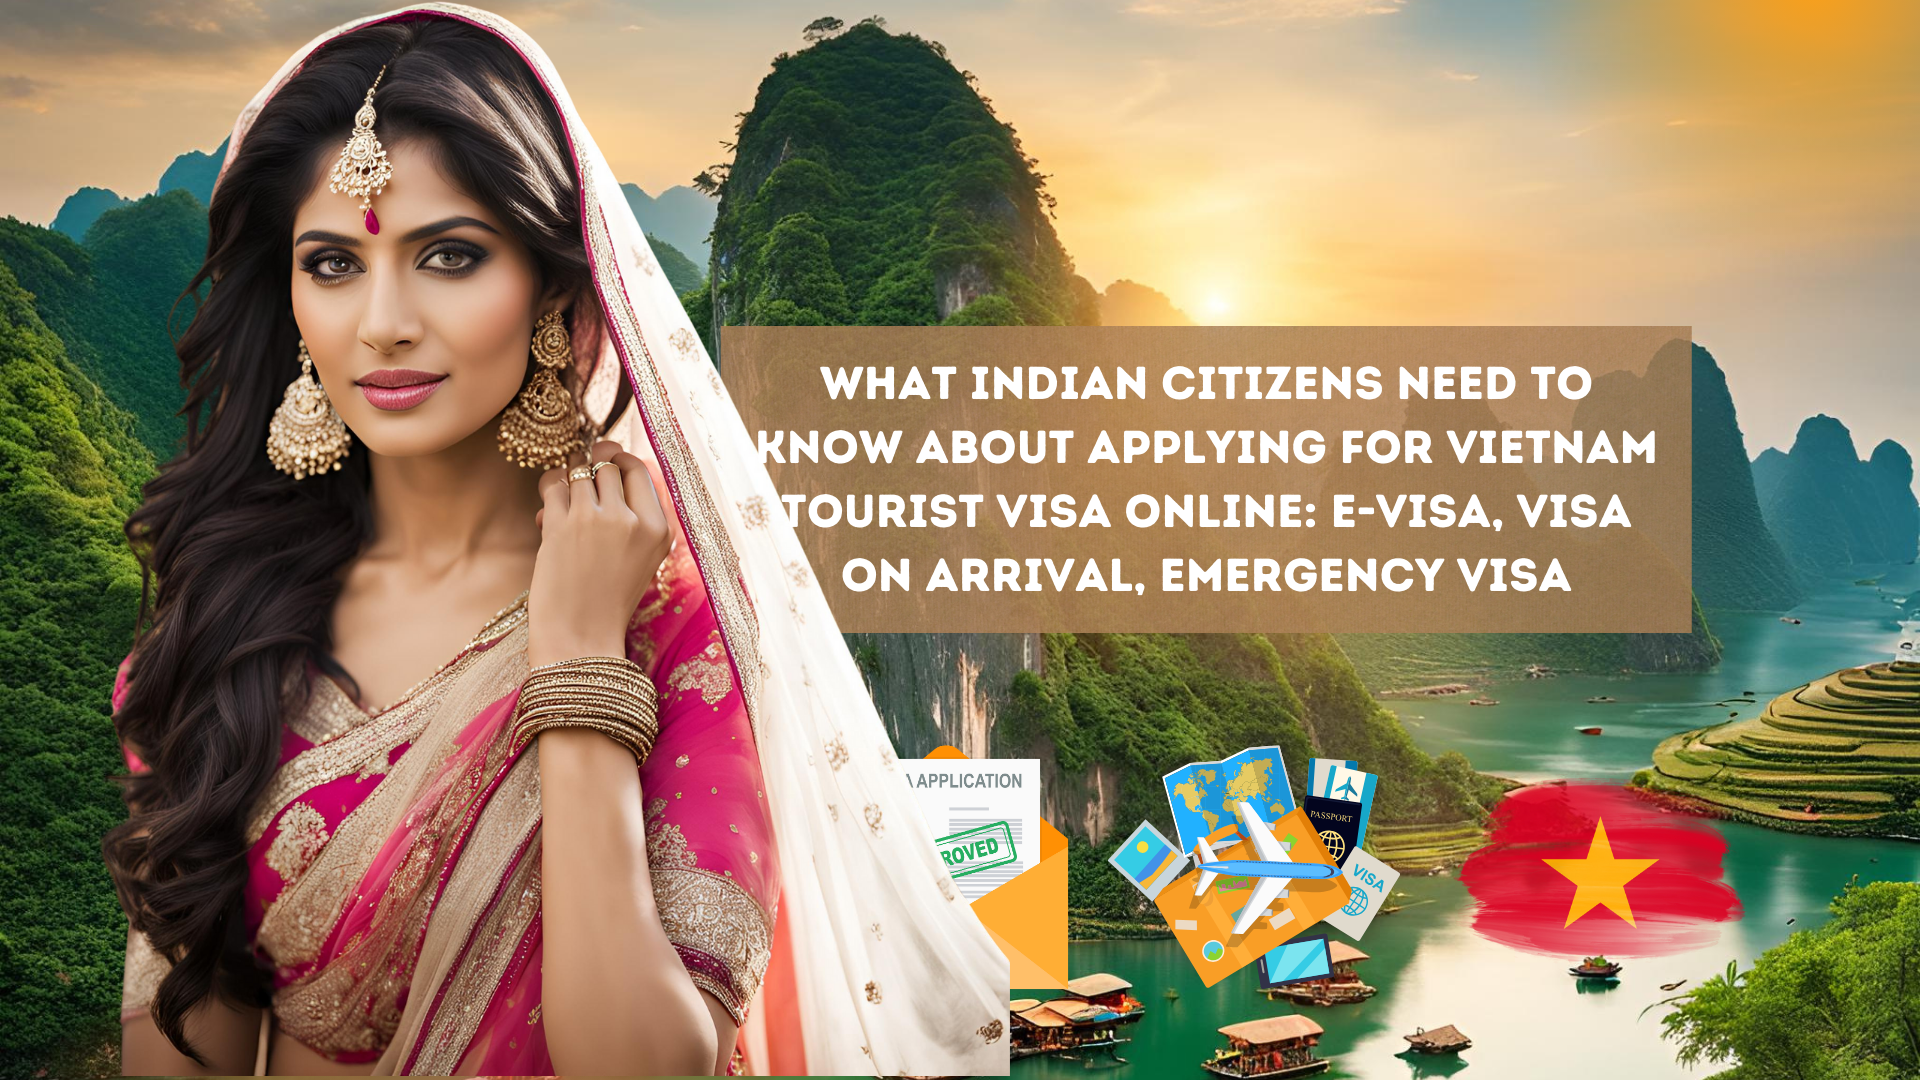 What Indian Citizens need to know about applying for Vietnam tourist visa online: e-visa, visa on arrival, emergency visa